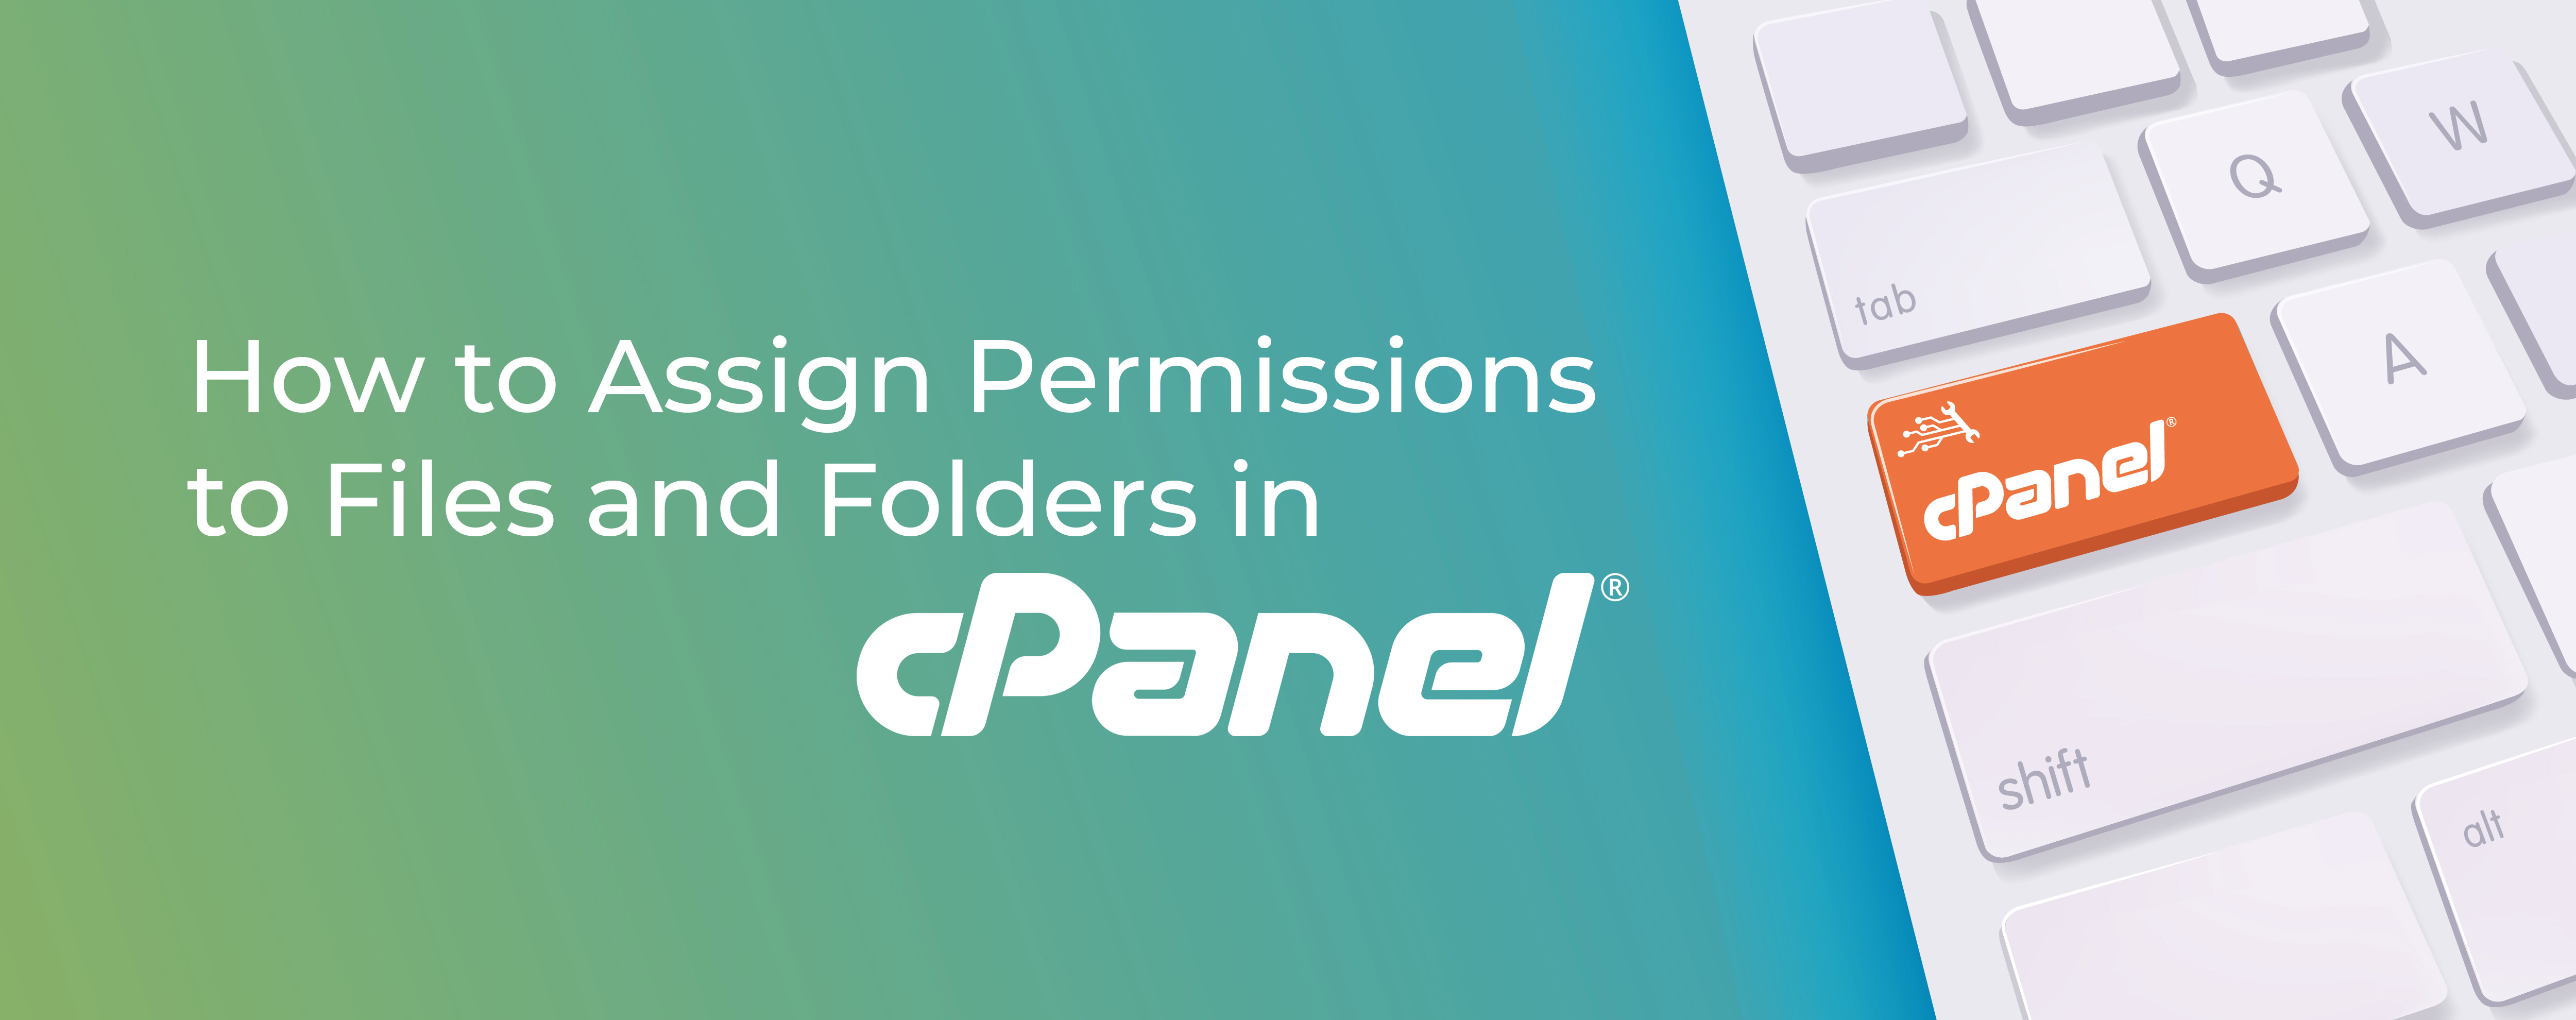 How To Assign Permissions To Files And Folders In Cpanel Cpanel Blog